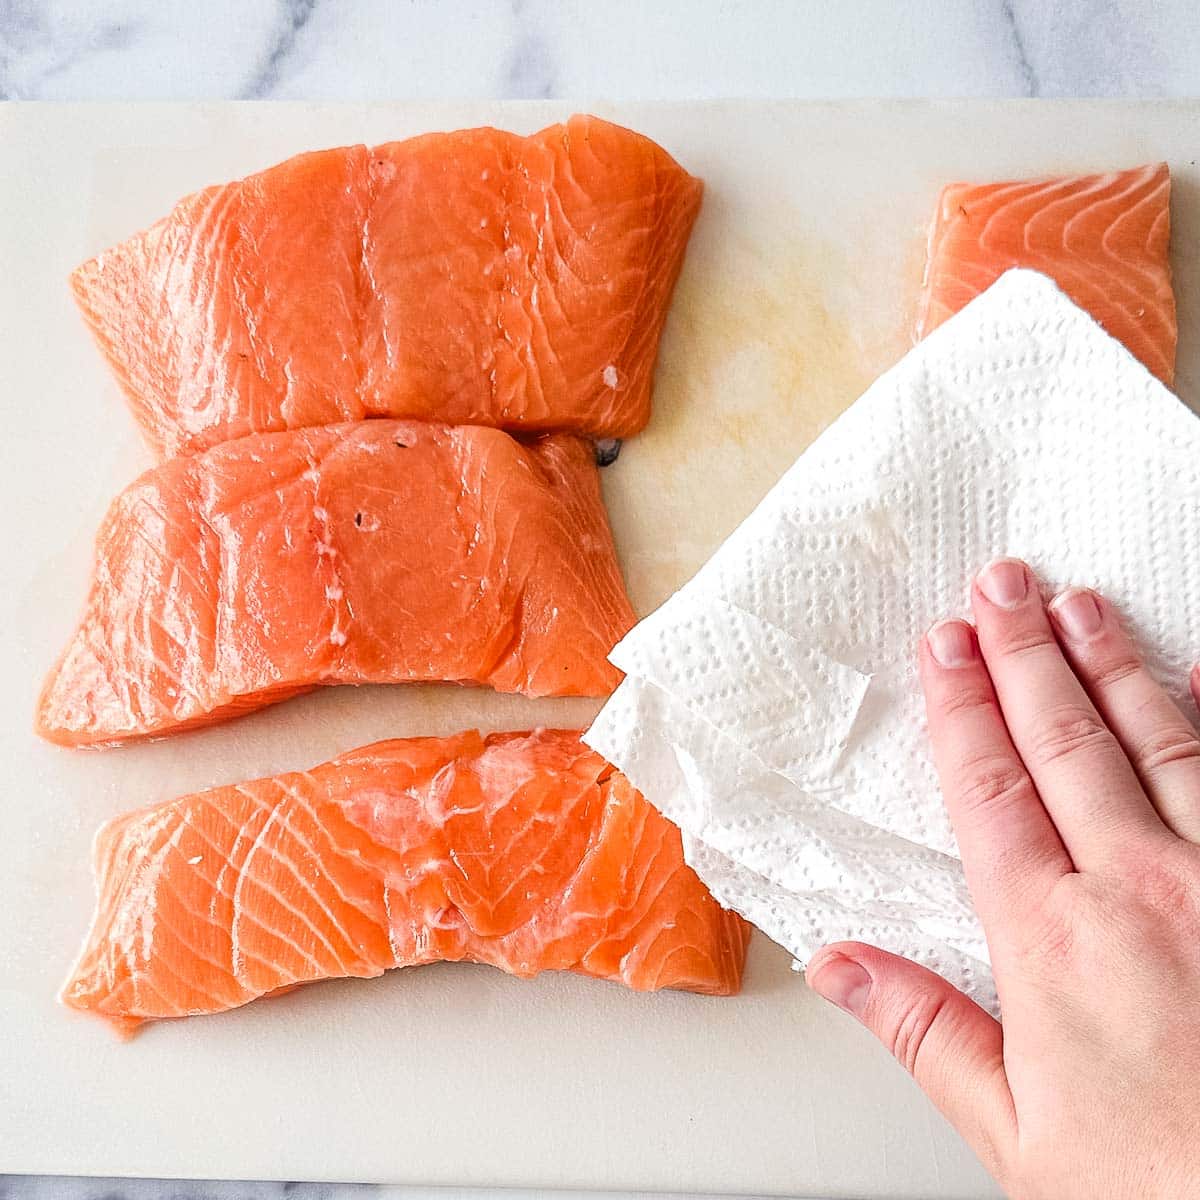 Salmon fillets on a cutting board with a hand patting them dry them with a paper towel.